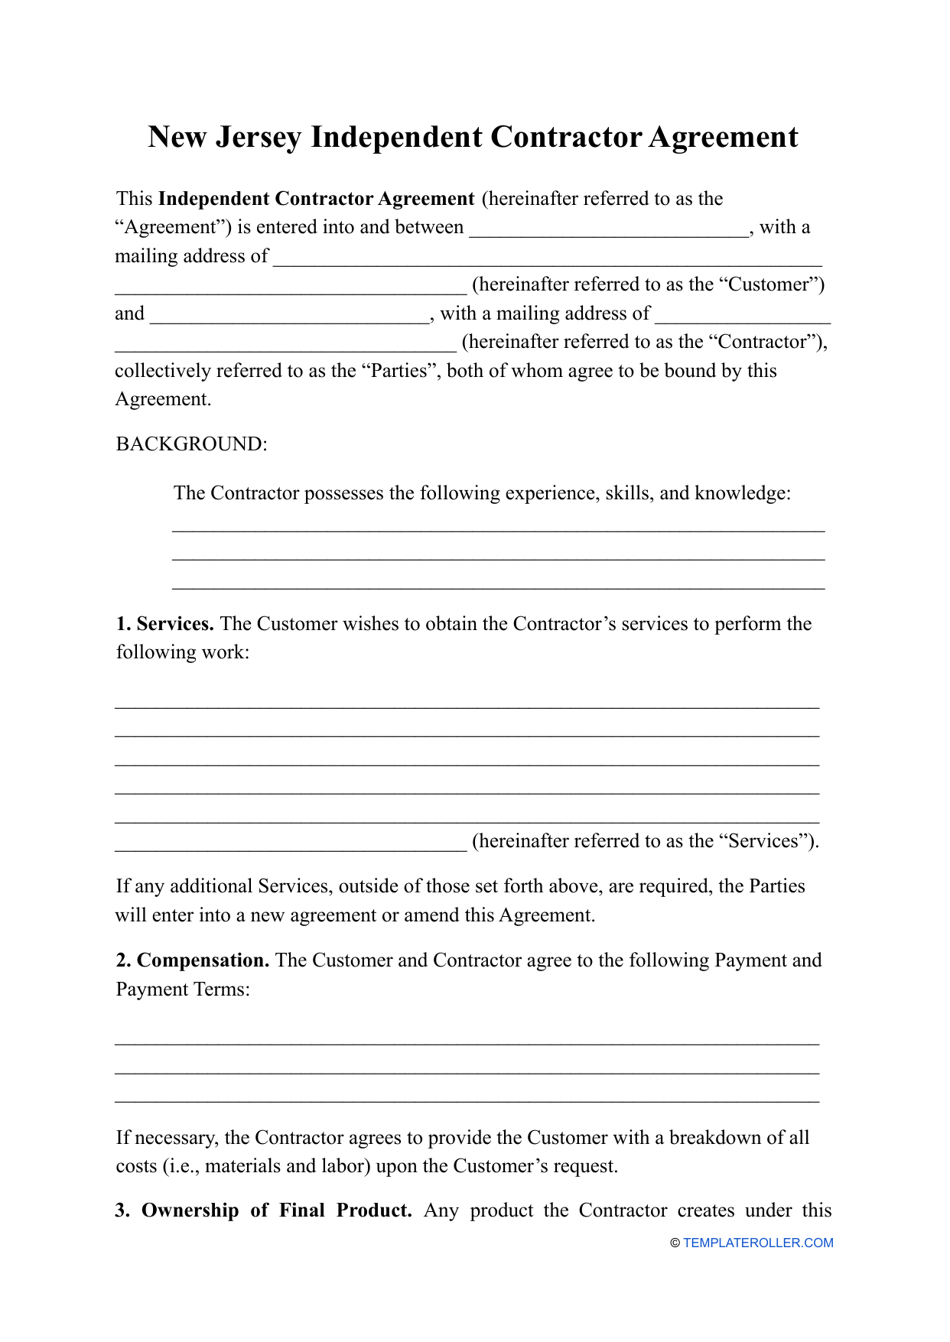 Independent Contractor Agreement Template - New Jersey, Page 1